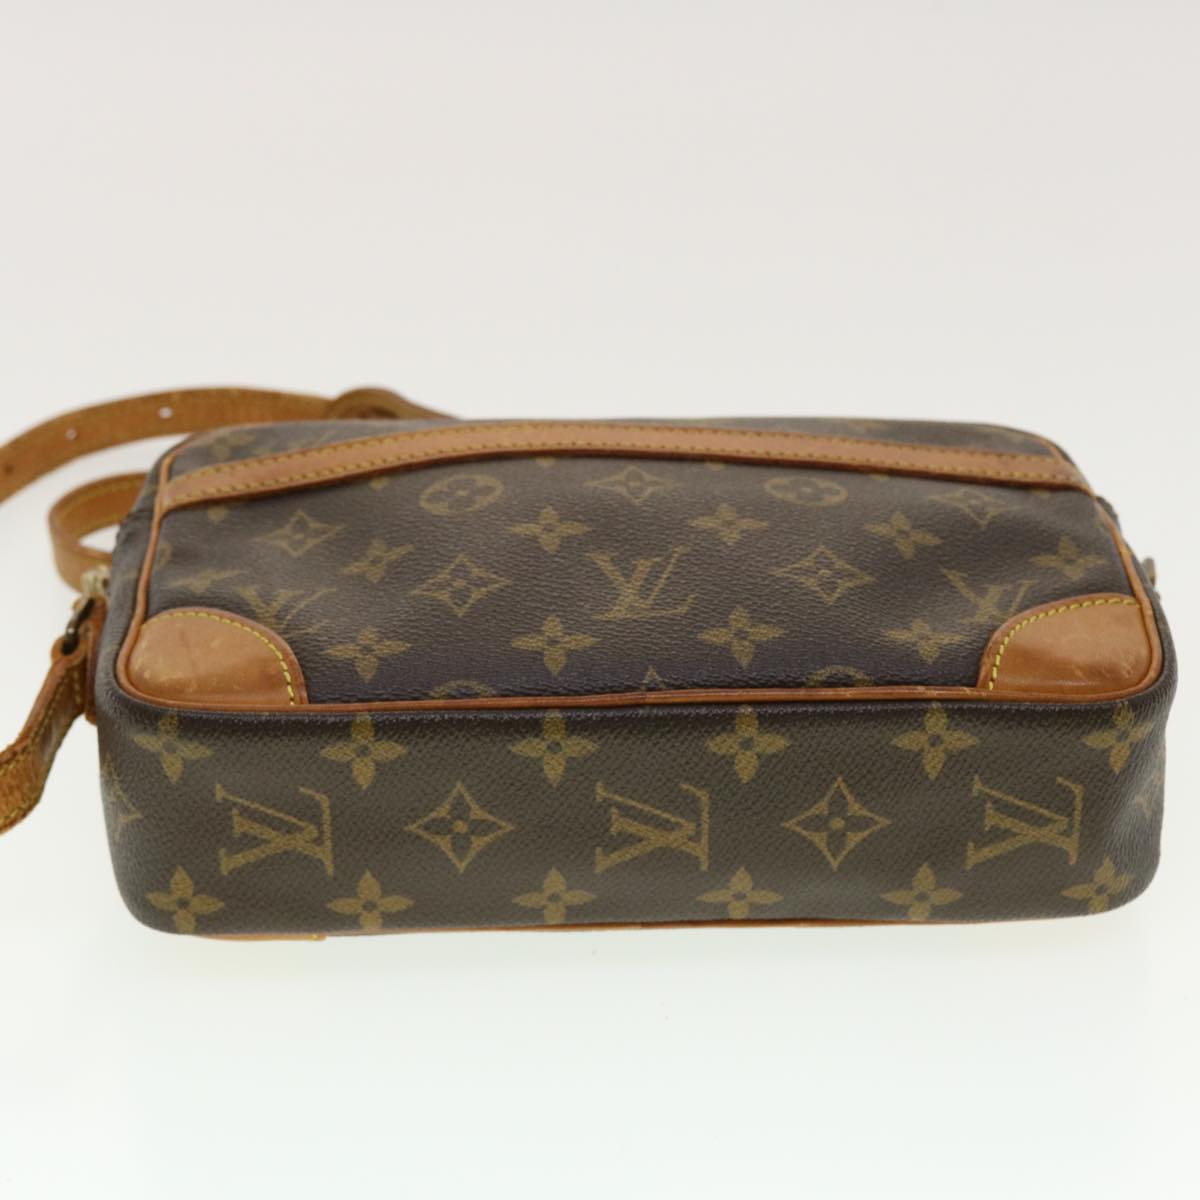 LOUIS VUITTON M51276 NO8903 MONOGRAM PATTERNED SHOULDER BAG MADE IN  FRANCE/ルイヴィトントロカデロモノグラム柄ショルダーバッグ